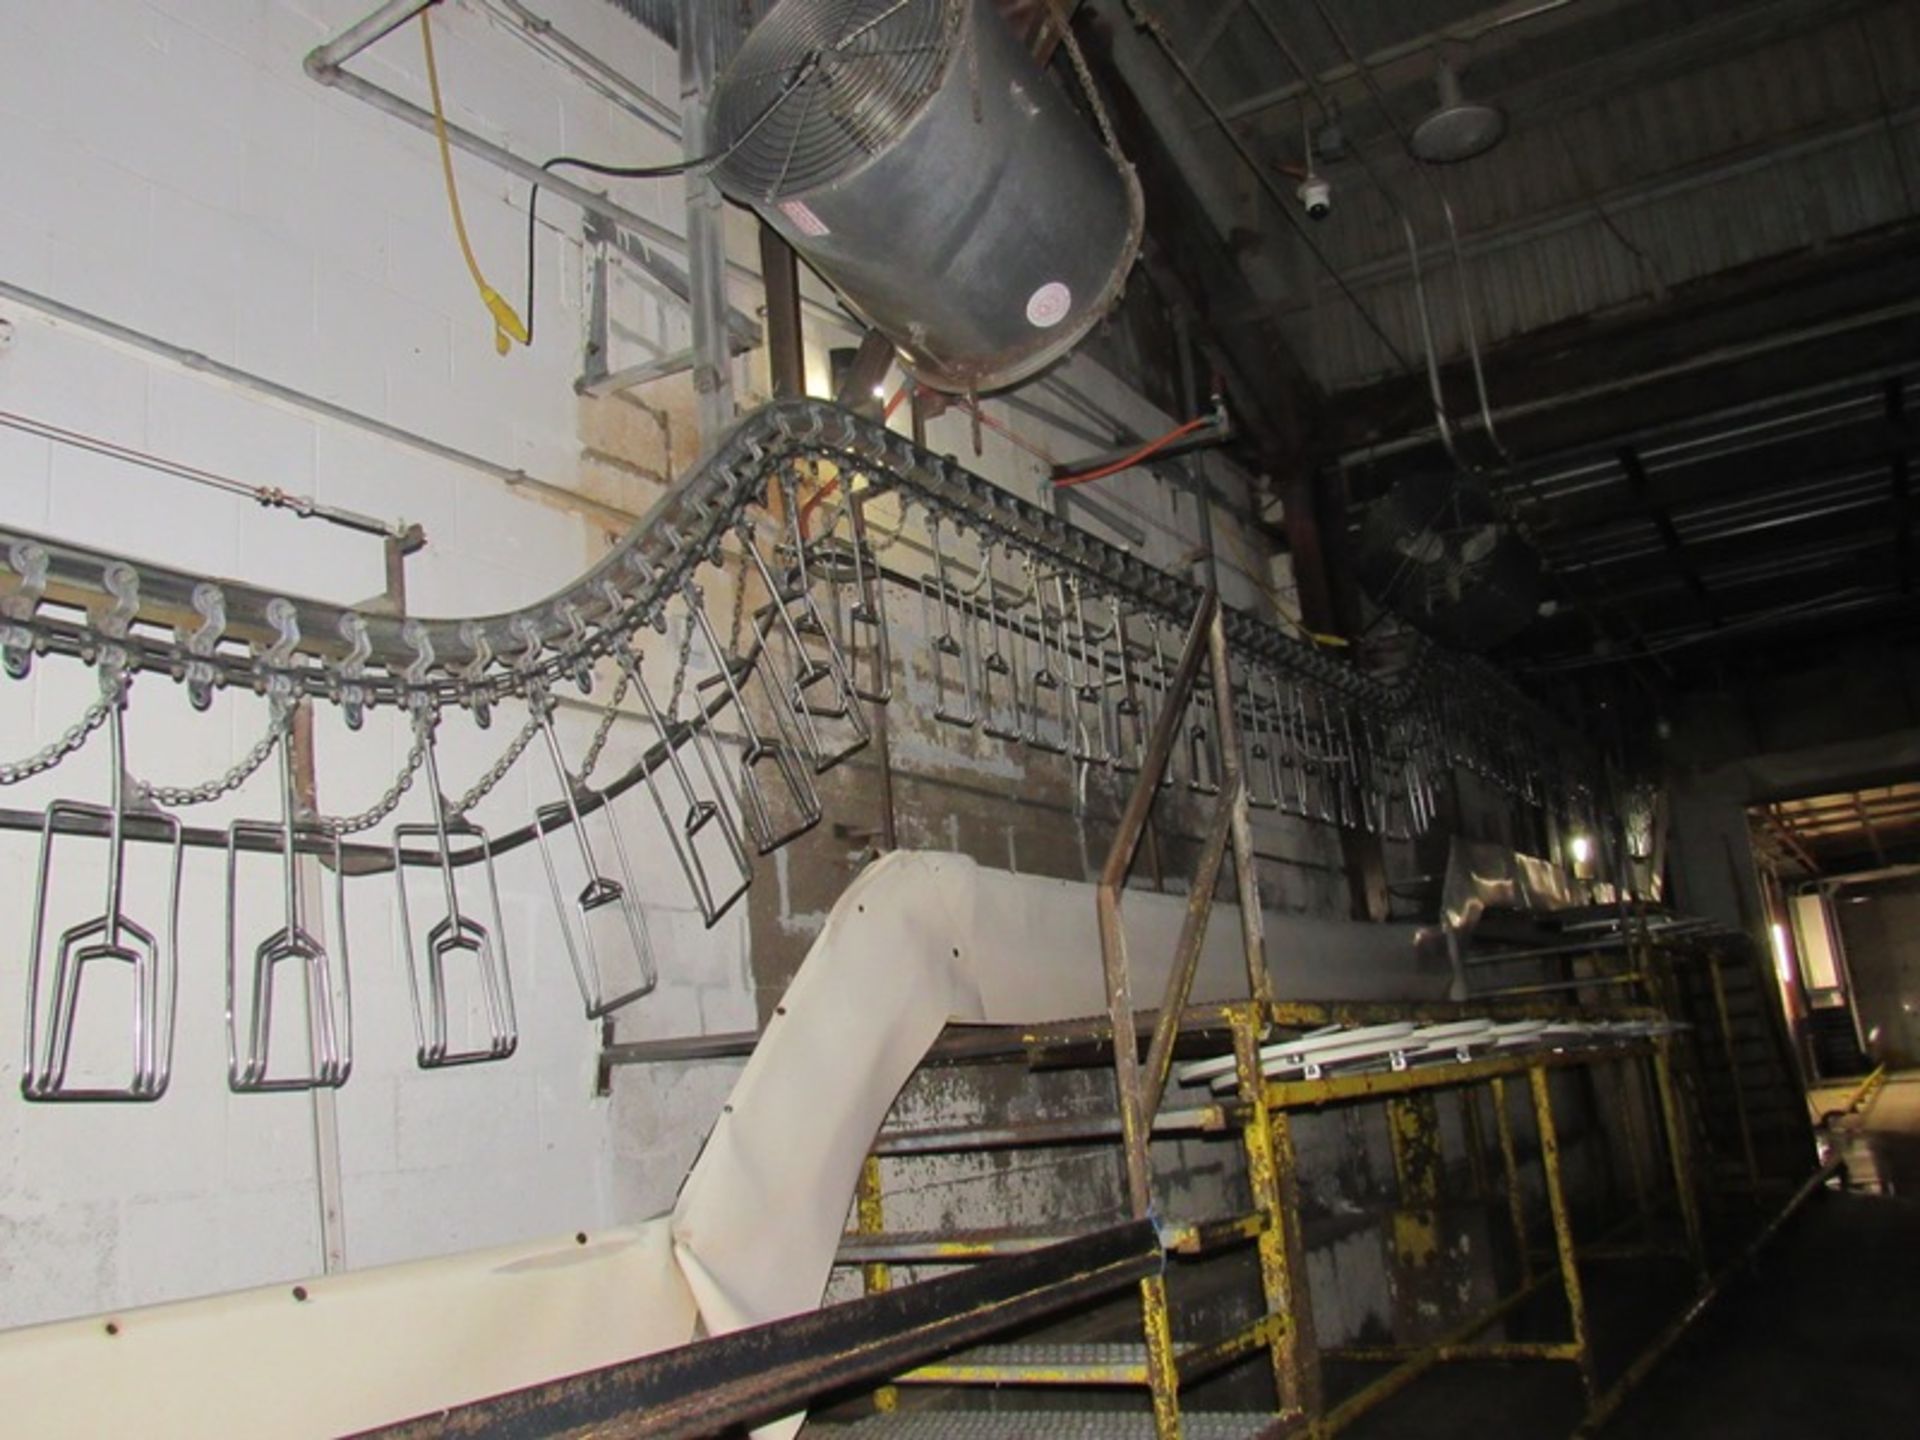 Lot Rail, Hangers and Chain approx. 800 stainless steel turkey Hangers on approx. | Rig Fee: $5200 - Image 6 of 15